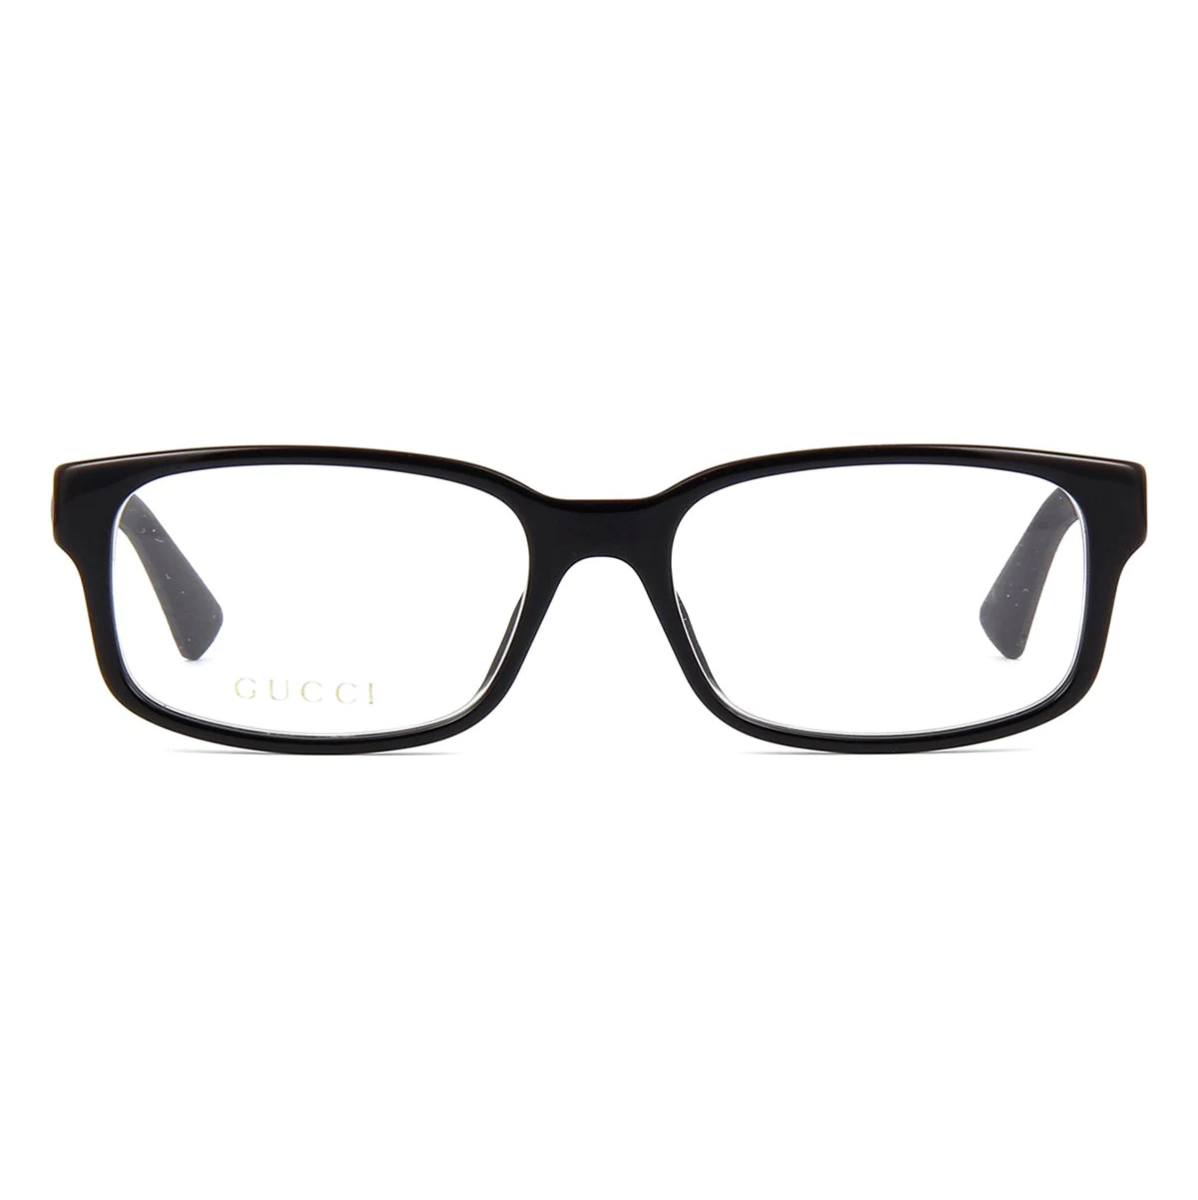 "Gucci 0012O Men's Spectacle Frame - Elevate Your Style with Optorium's Latest Eyewear Collection."